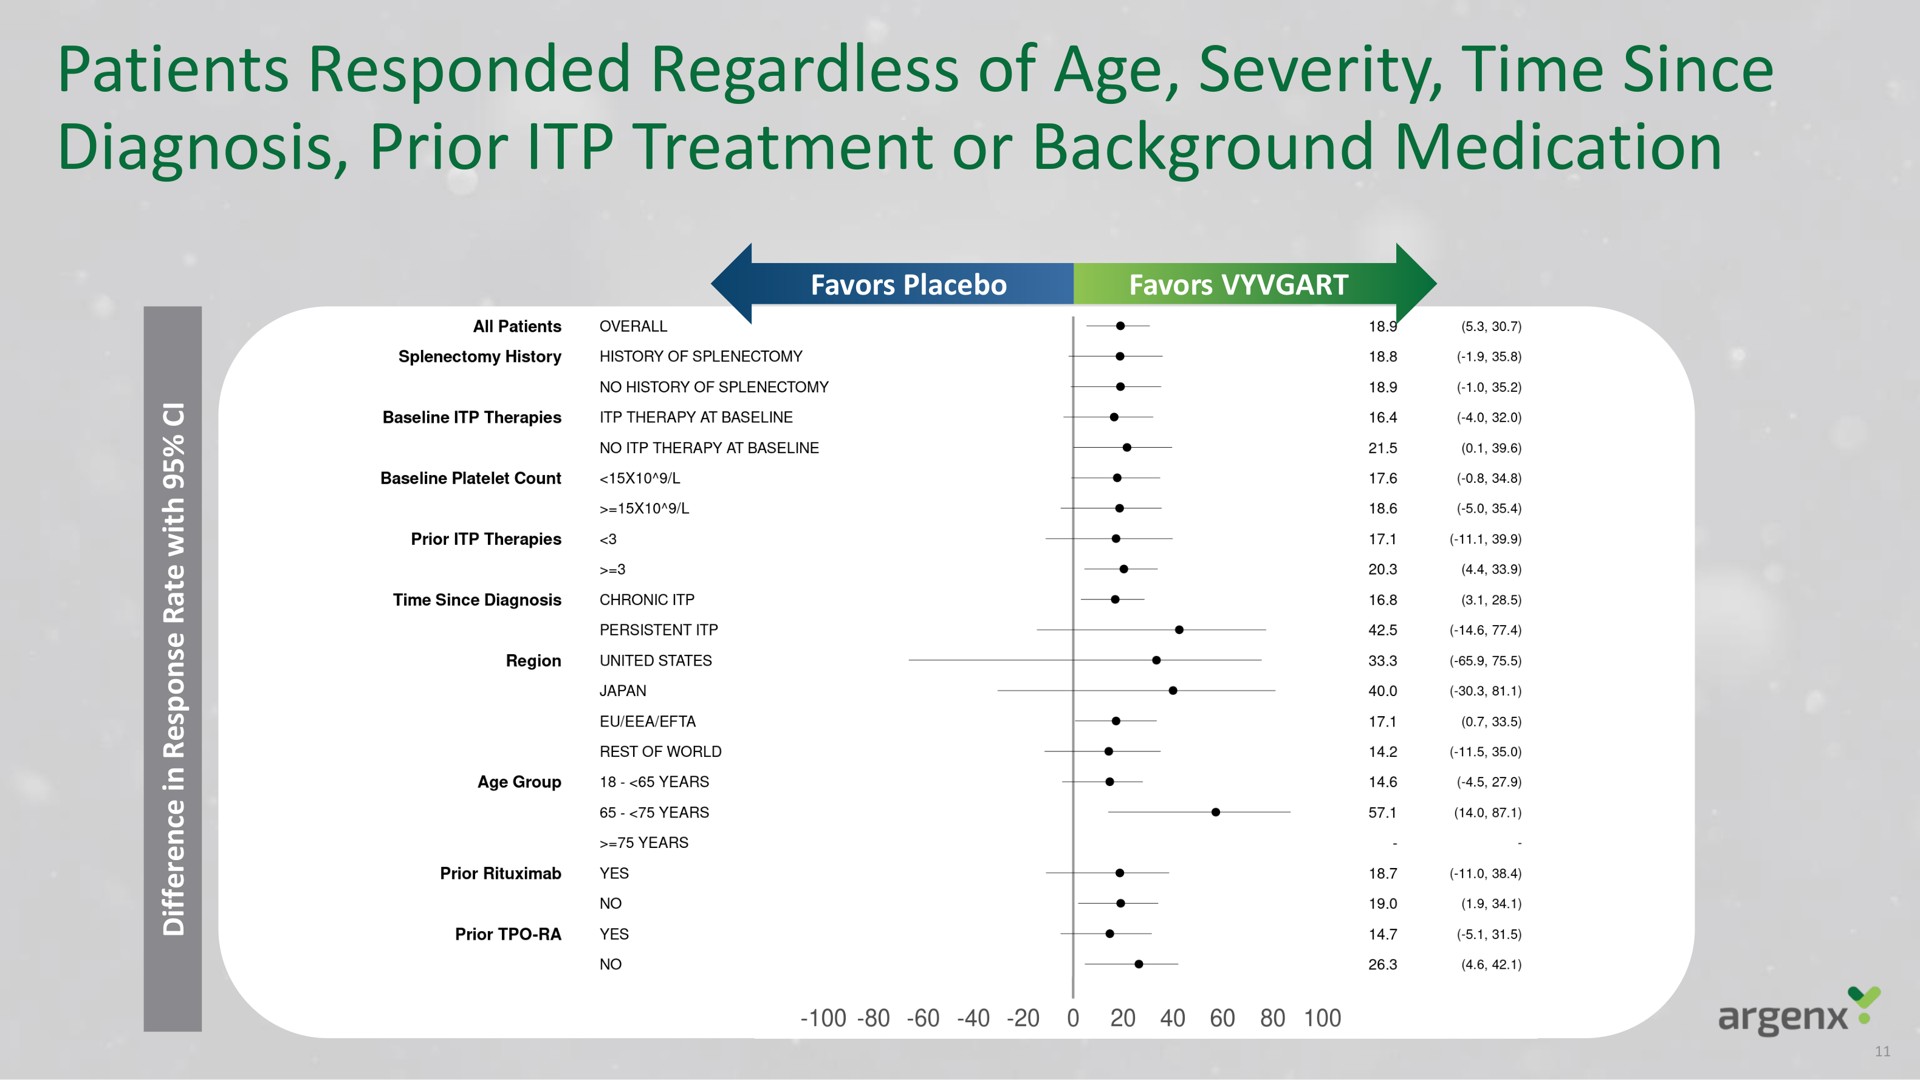 patients responded regardless of age severity time since diagnosis prior treatment or background medication | argenx SE